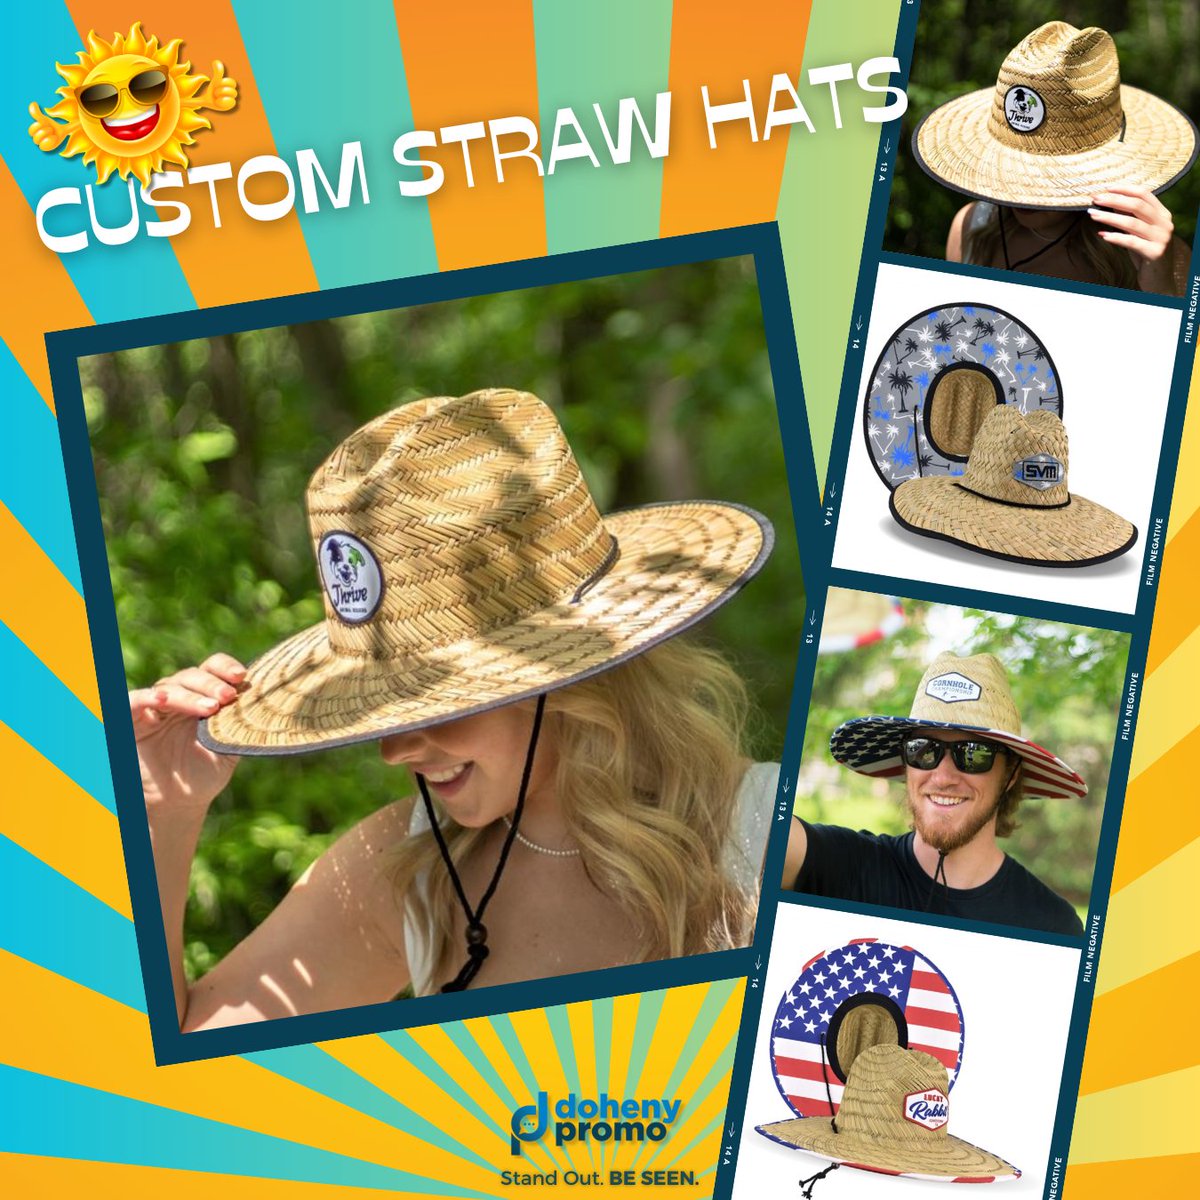 Promote your business with these one-of-a-kind straw hats!

Get yours today at (941) 202-9950 or info@doheny.promo.

Stand Out. BE SEEN.

#promotionalproductswork | #brandawareness | #marketing | #impressions | #strawhats | #sun | #smallbiz | #veteranowned